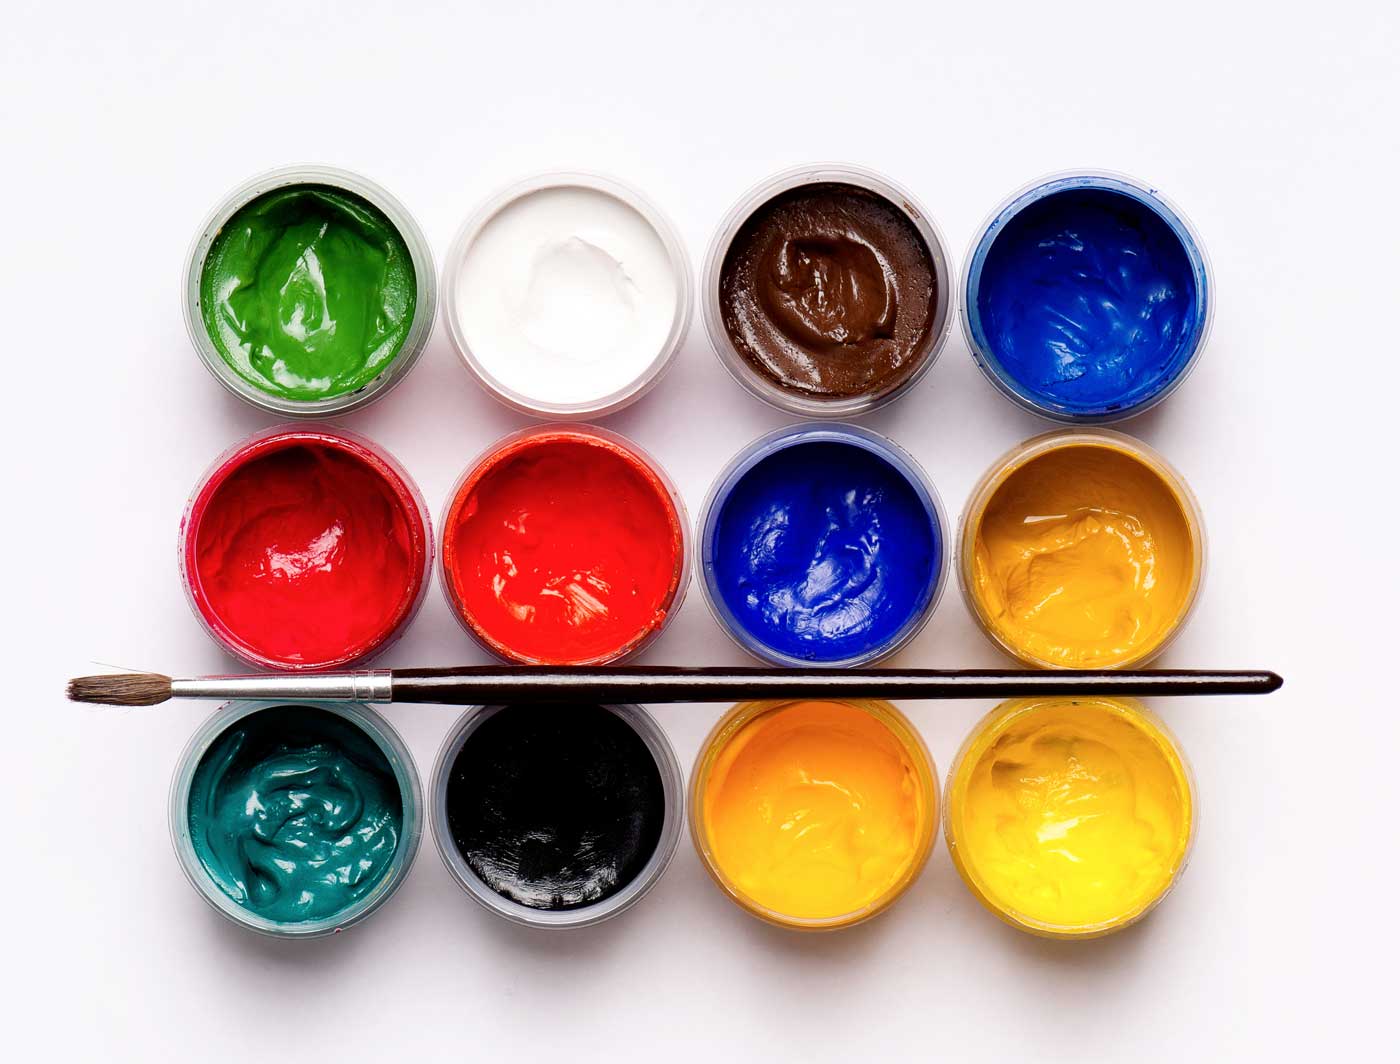 DIY Gouache: A Step-by-Step Guide to Making Your Own Opaque Watercolor Paint